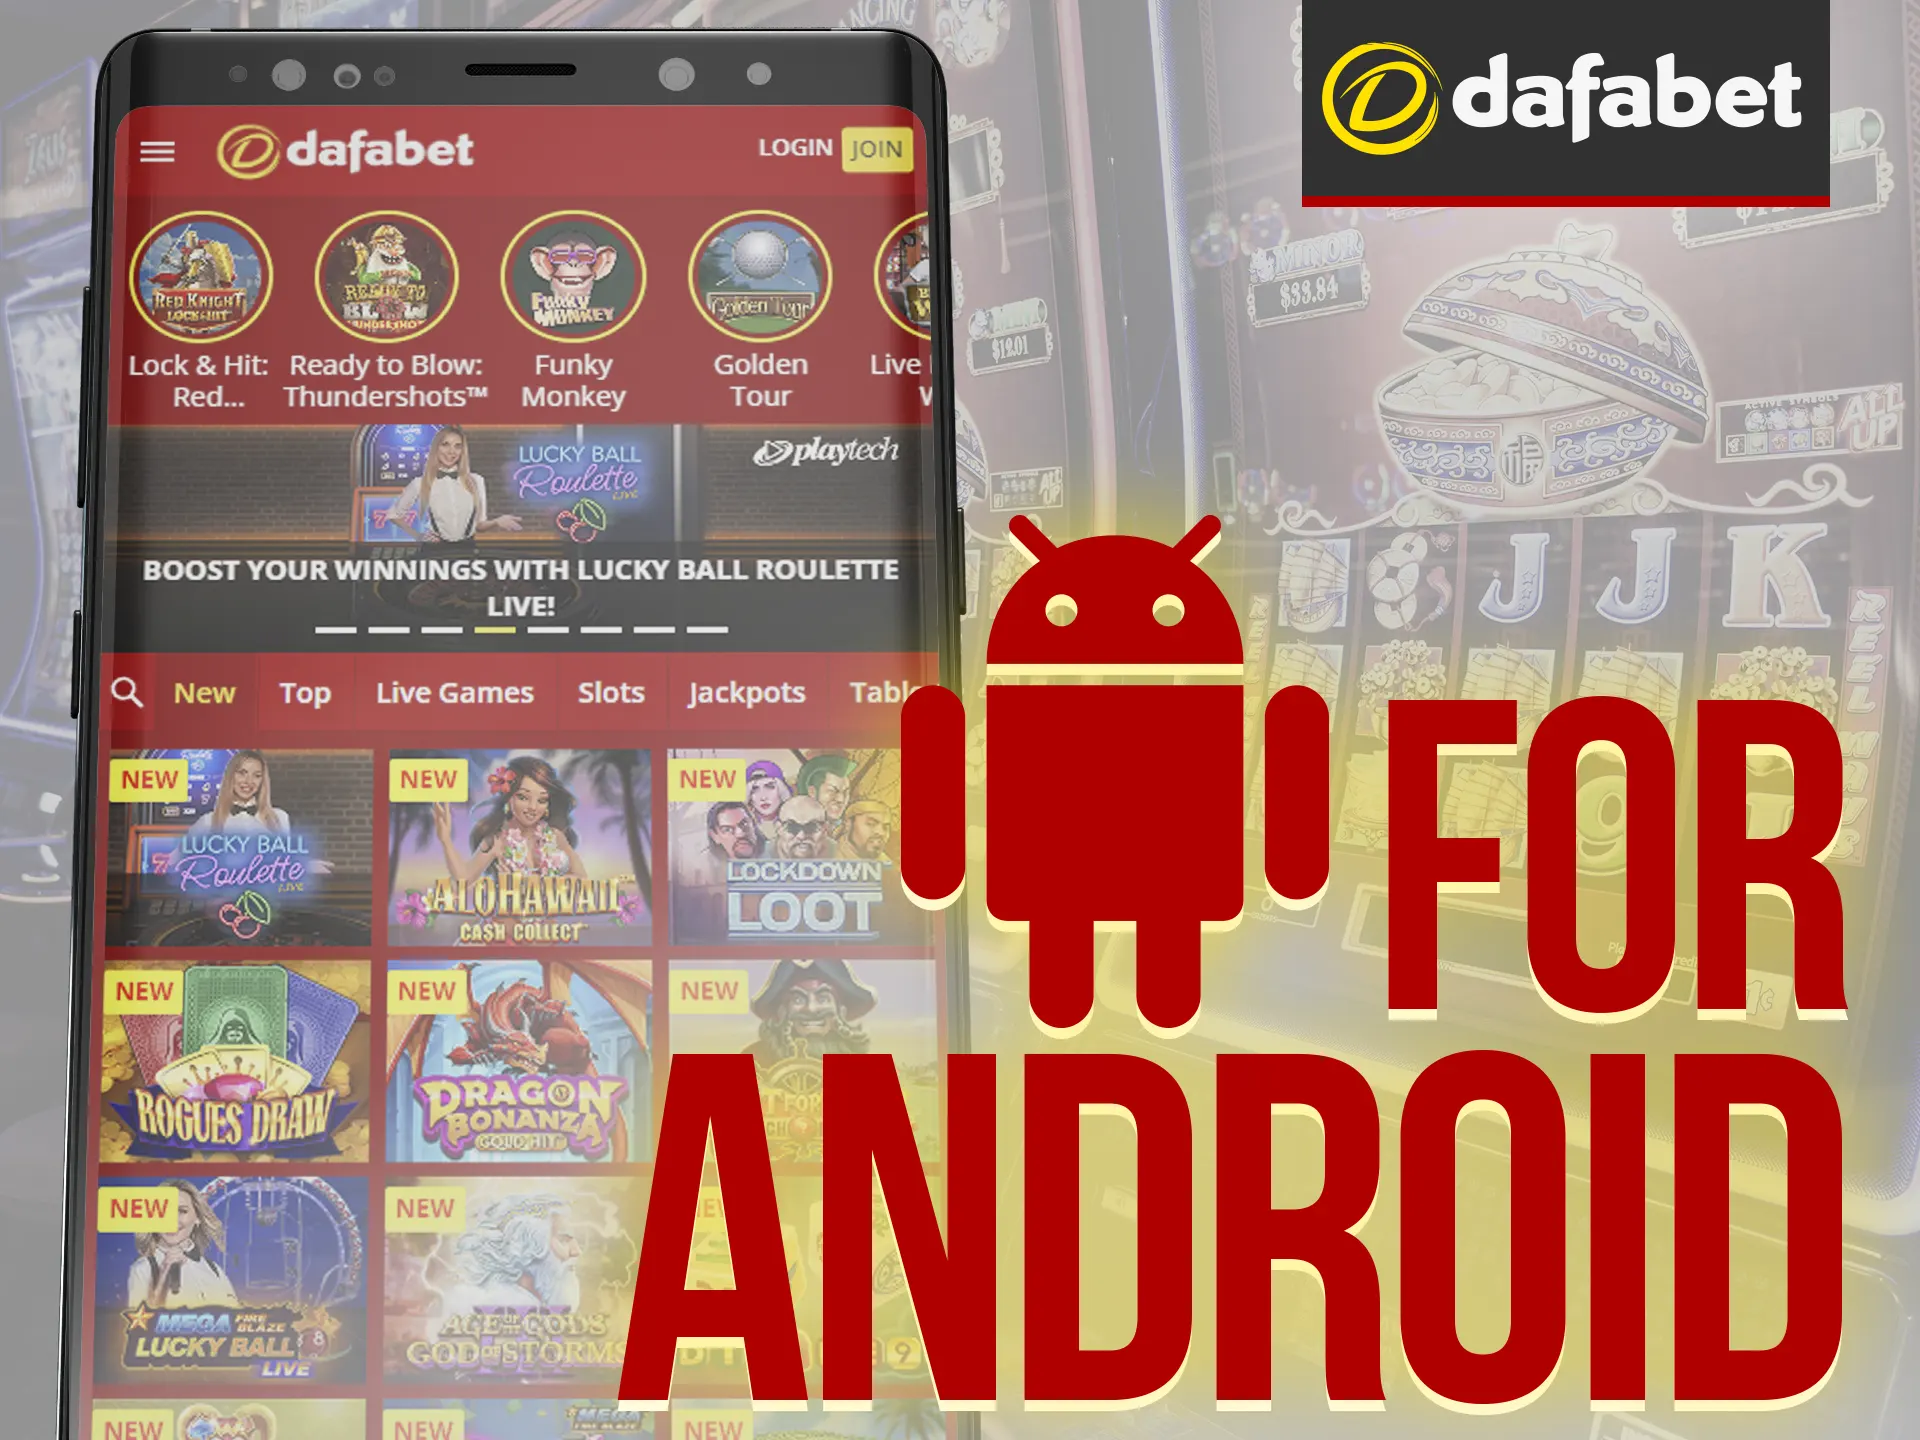 Visit the Dafabet mobile website, select the Android app section, download, and install.